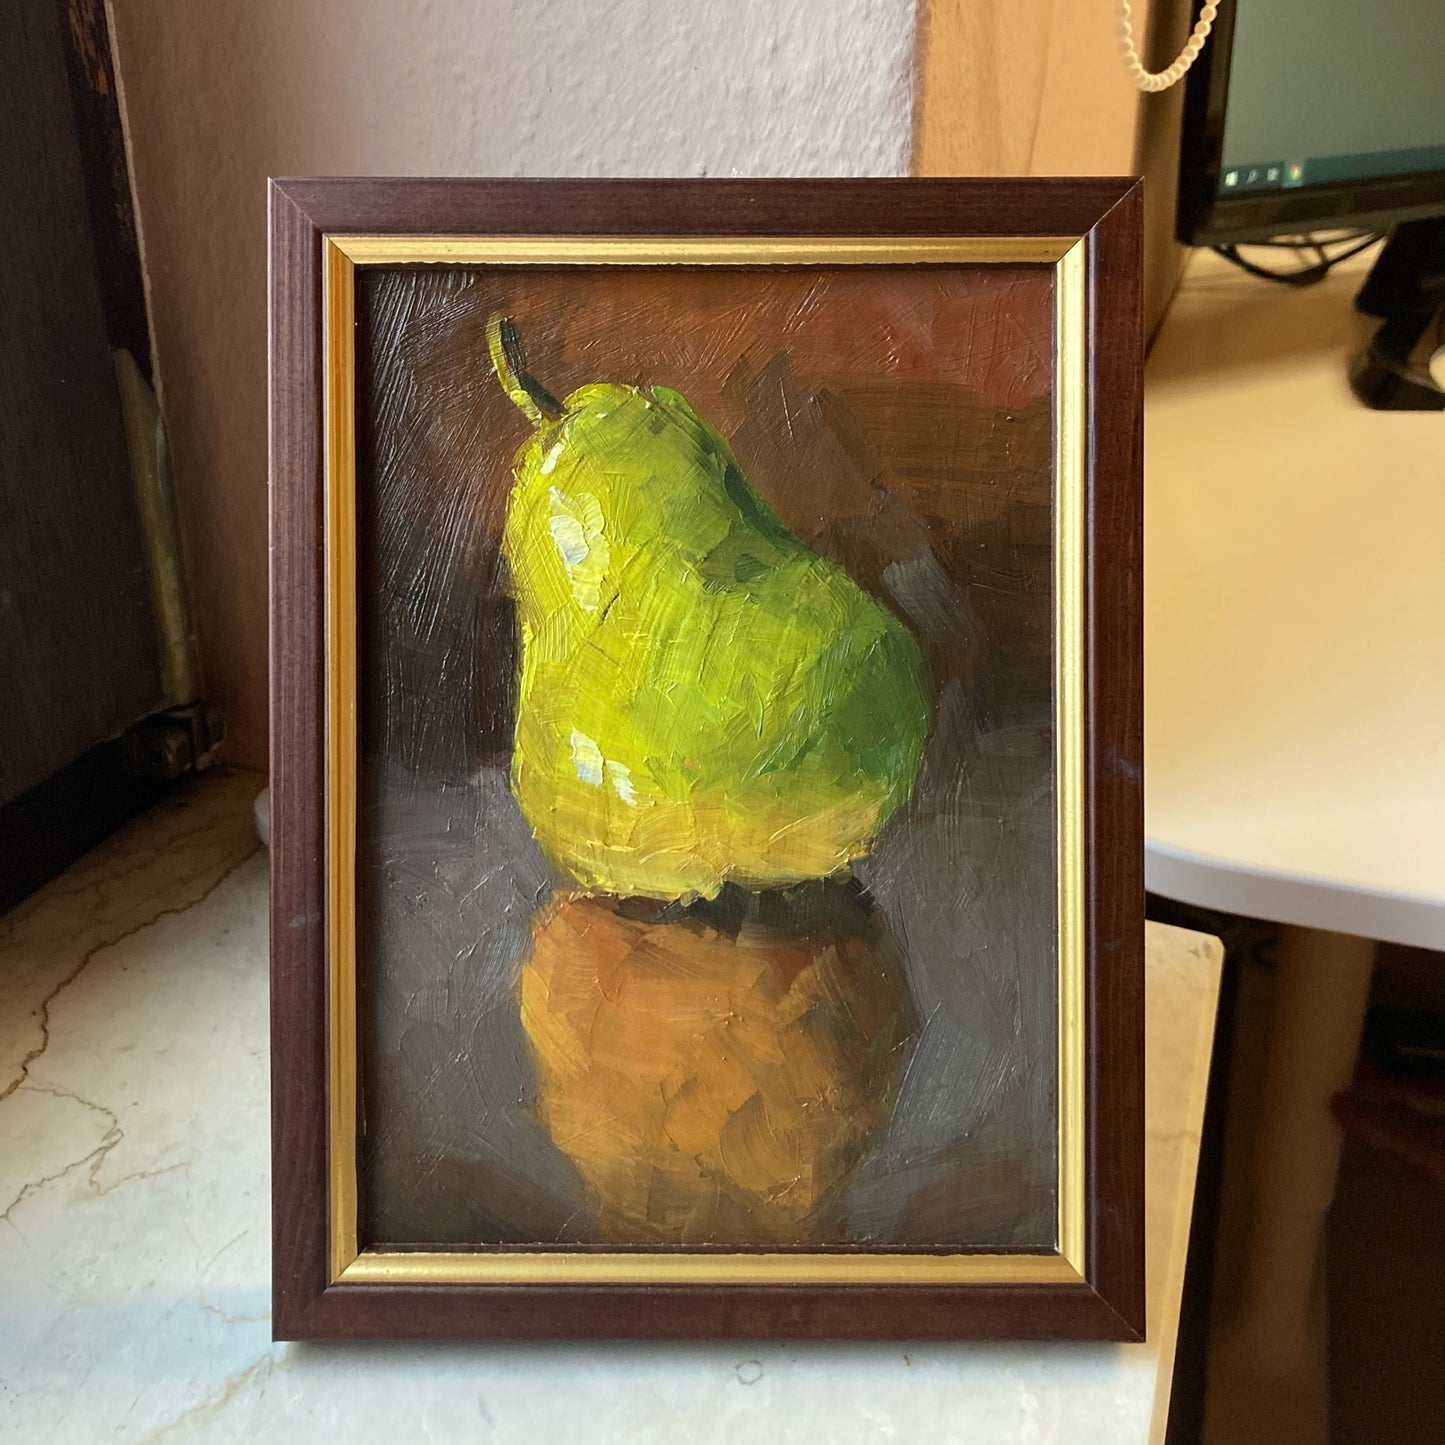 Small Stilllife painting of a pear